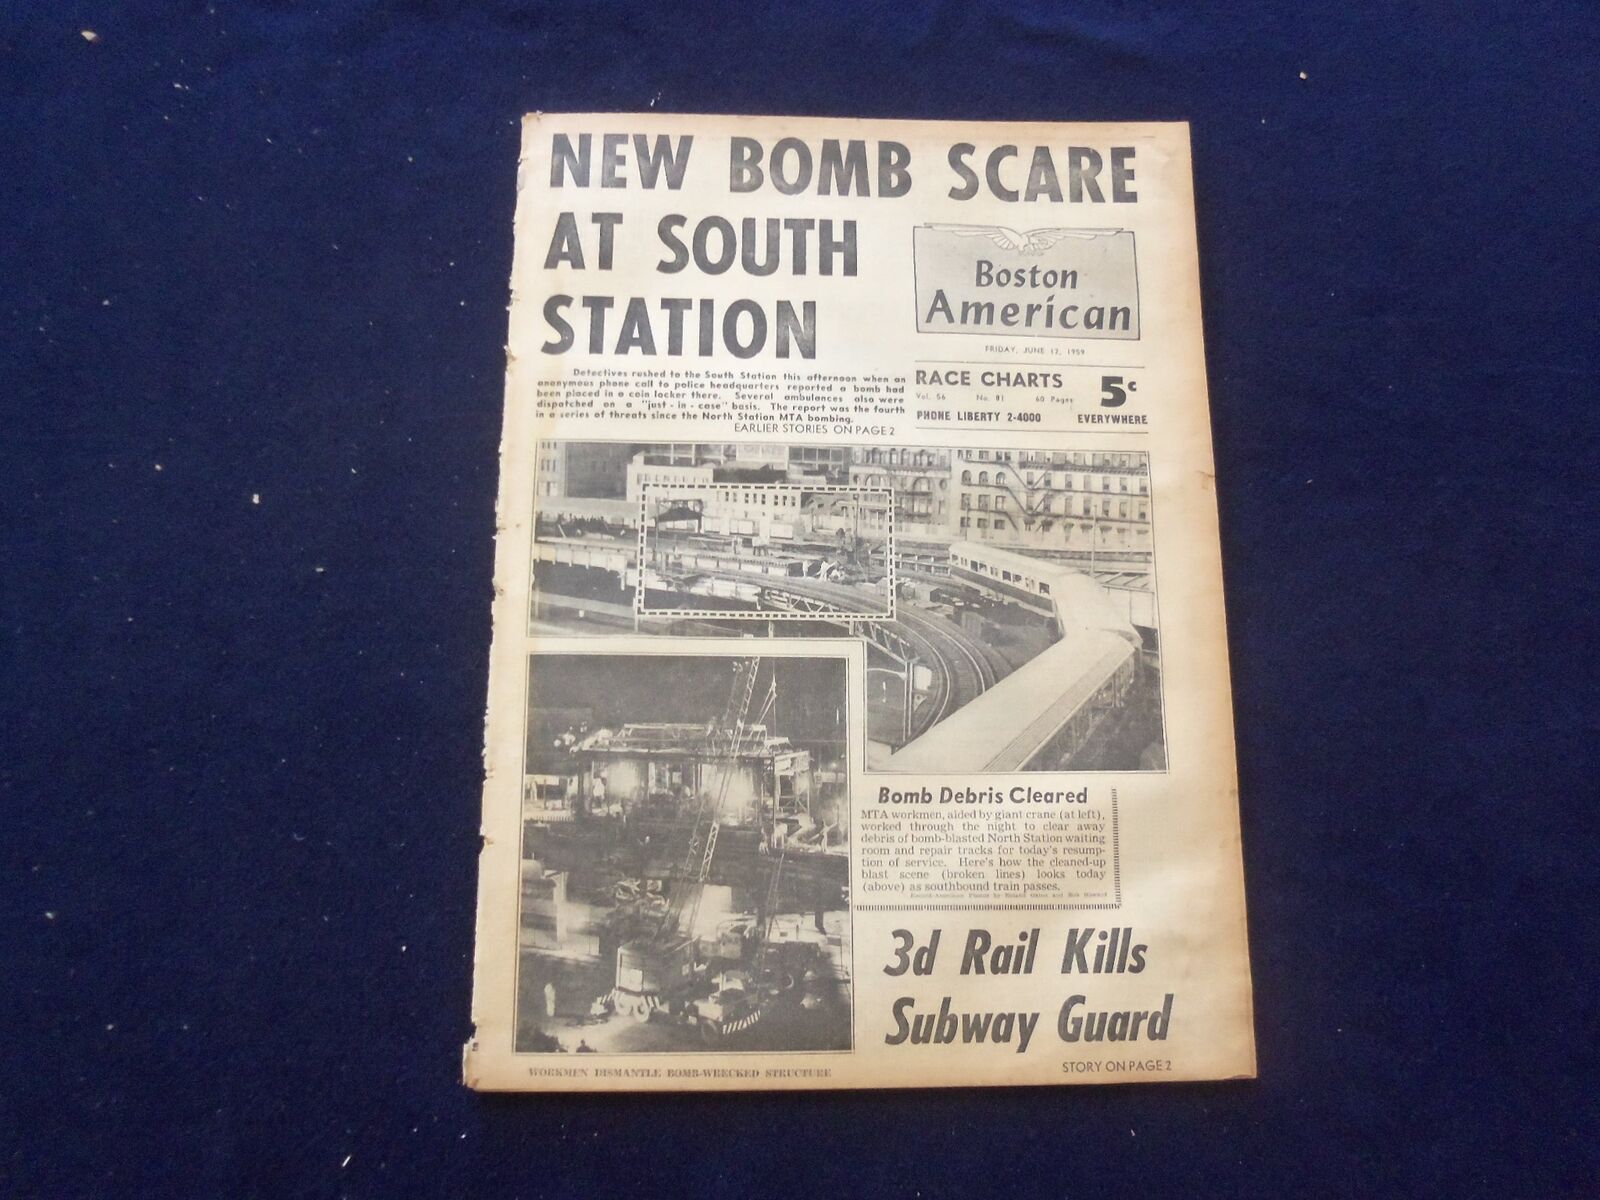 1959 JUNE 12 BOSTON AMERICAN NEWSPAPER - NEW BOMB SCARE AT SO. STATION - NP 6232